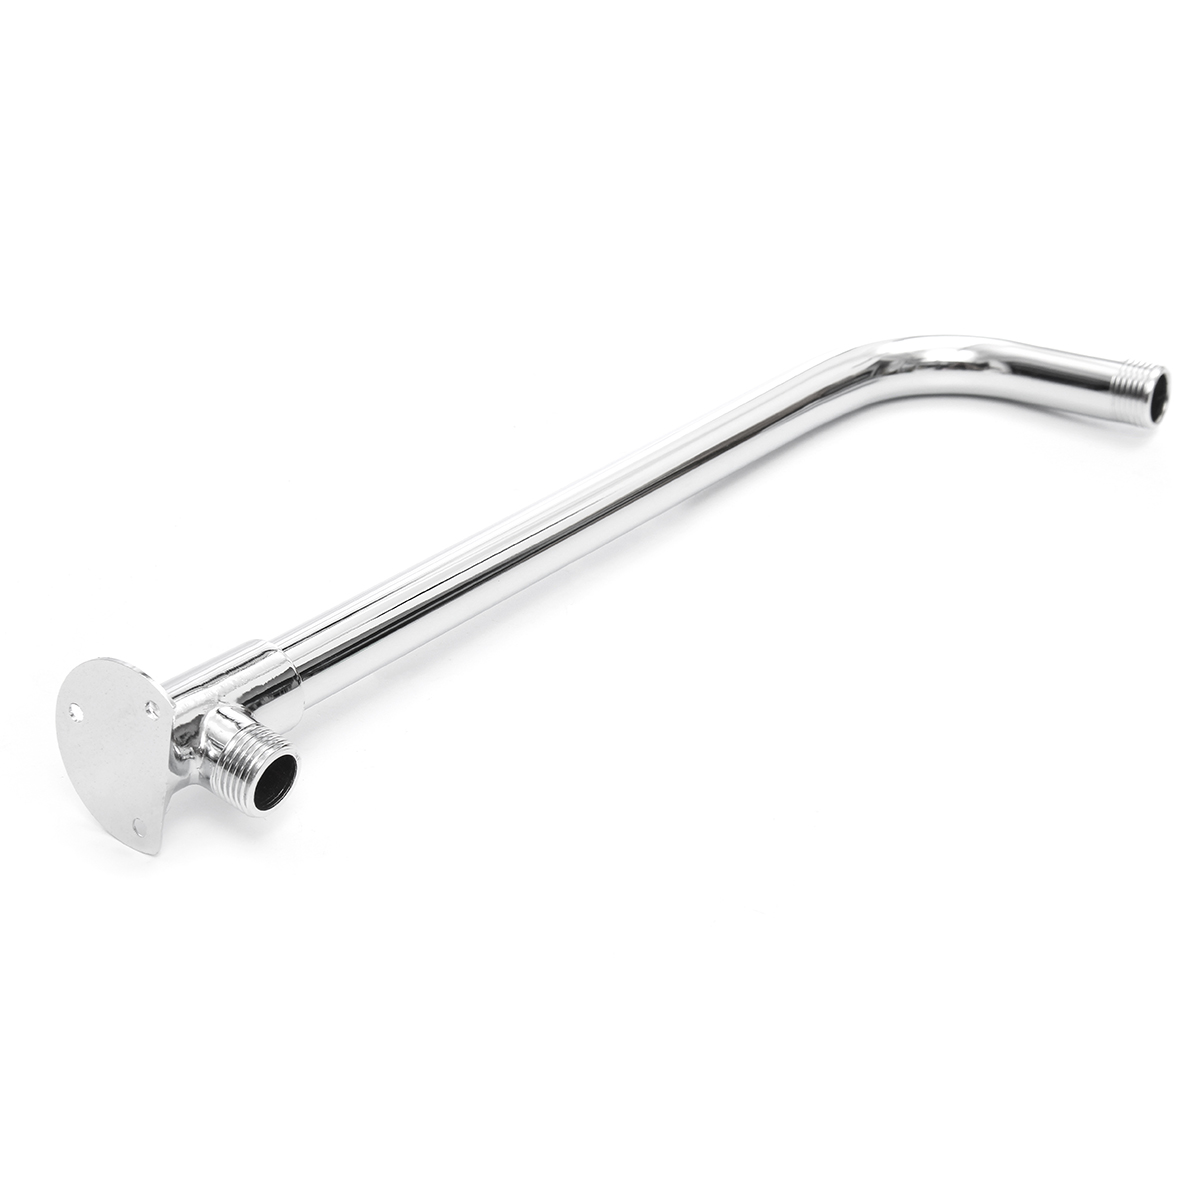 31cm-Bathroom-Chrome-Wall-Mounted-Shower-Extension-Arm-Pipe-Bottom-Entry-for-Rain-Shower-Head-1329398